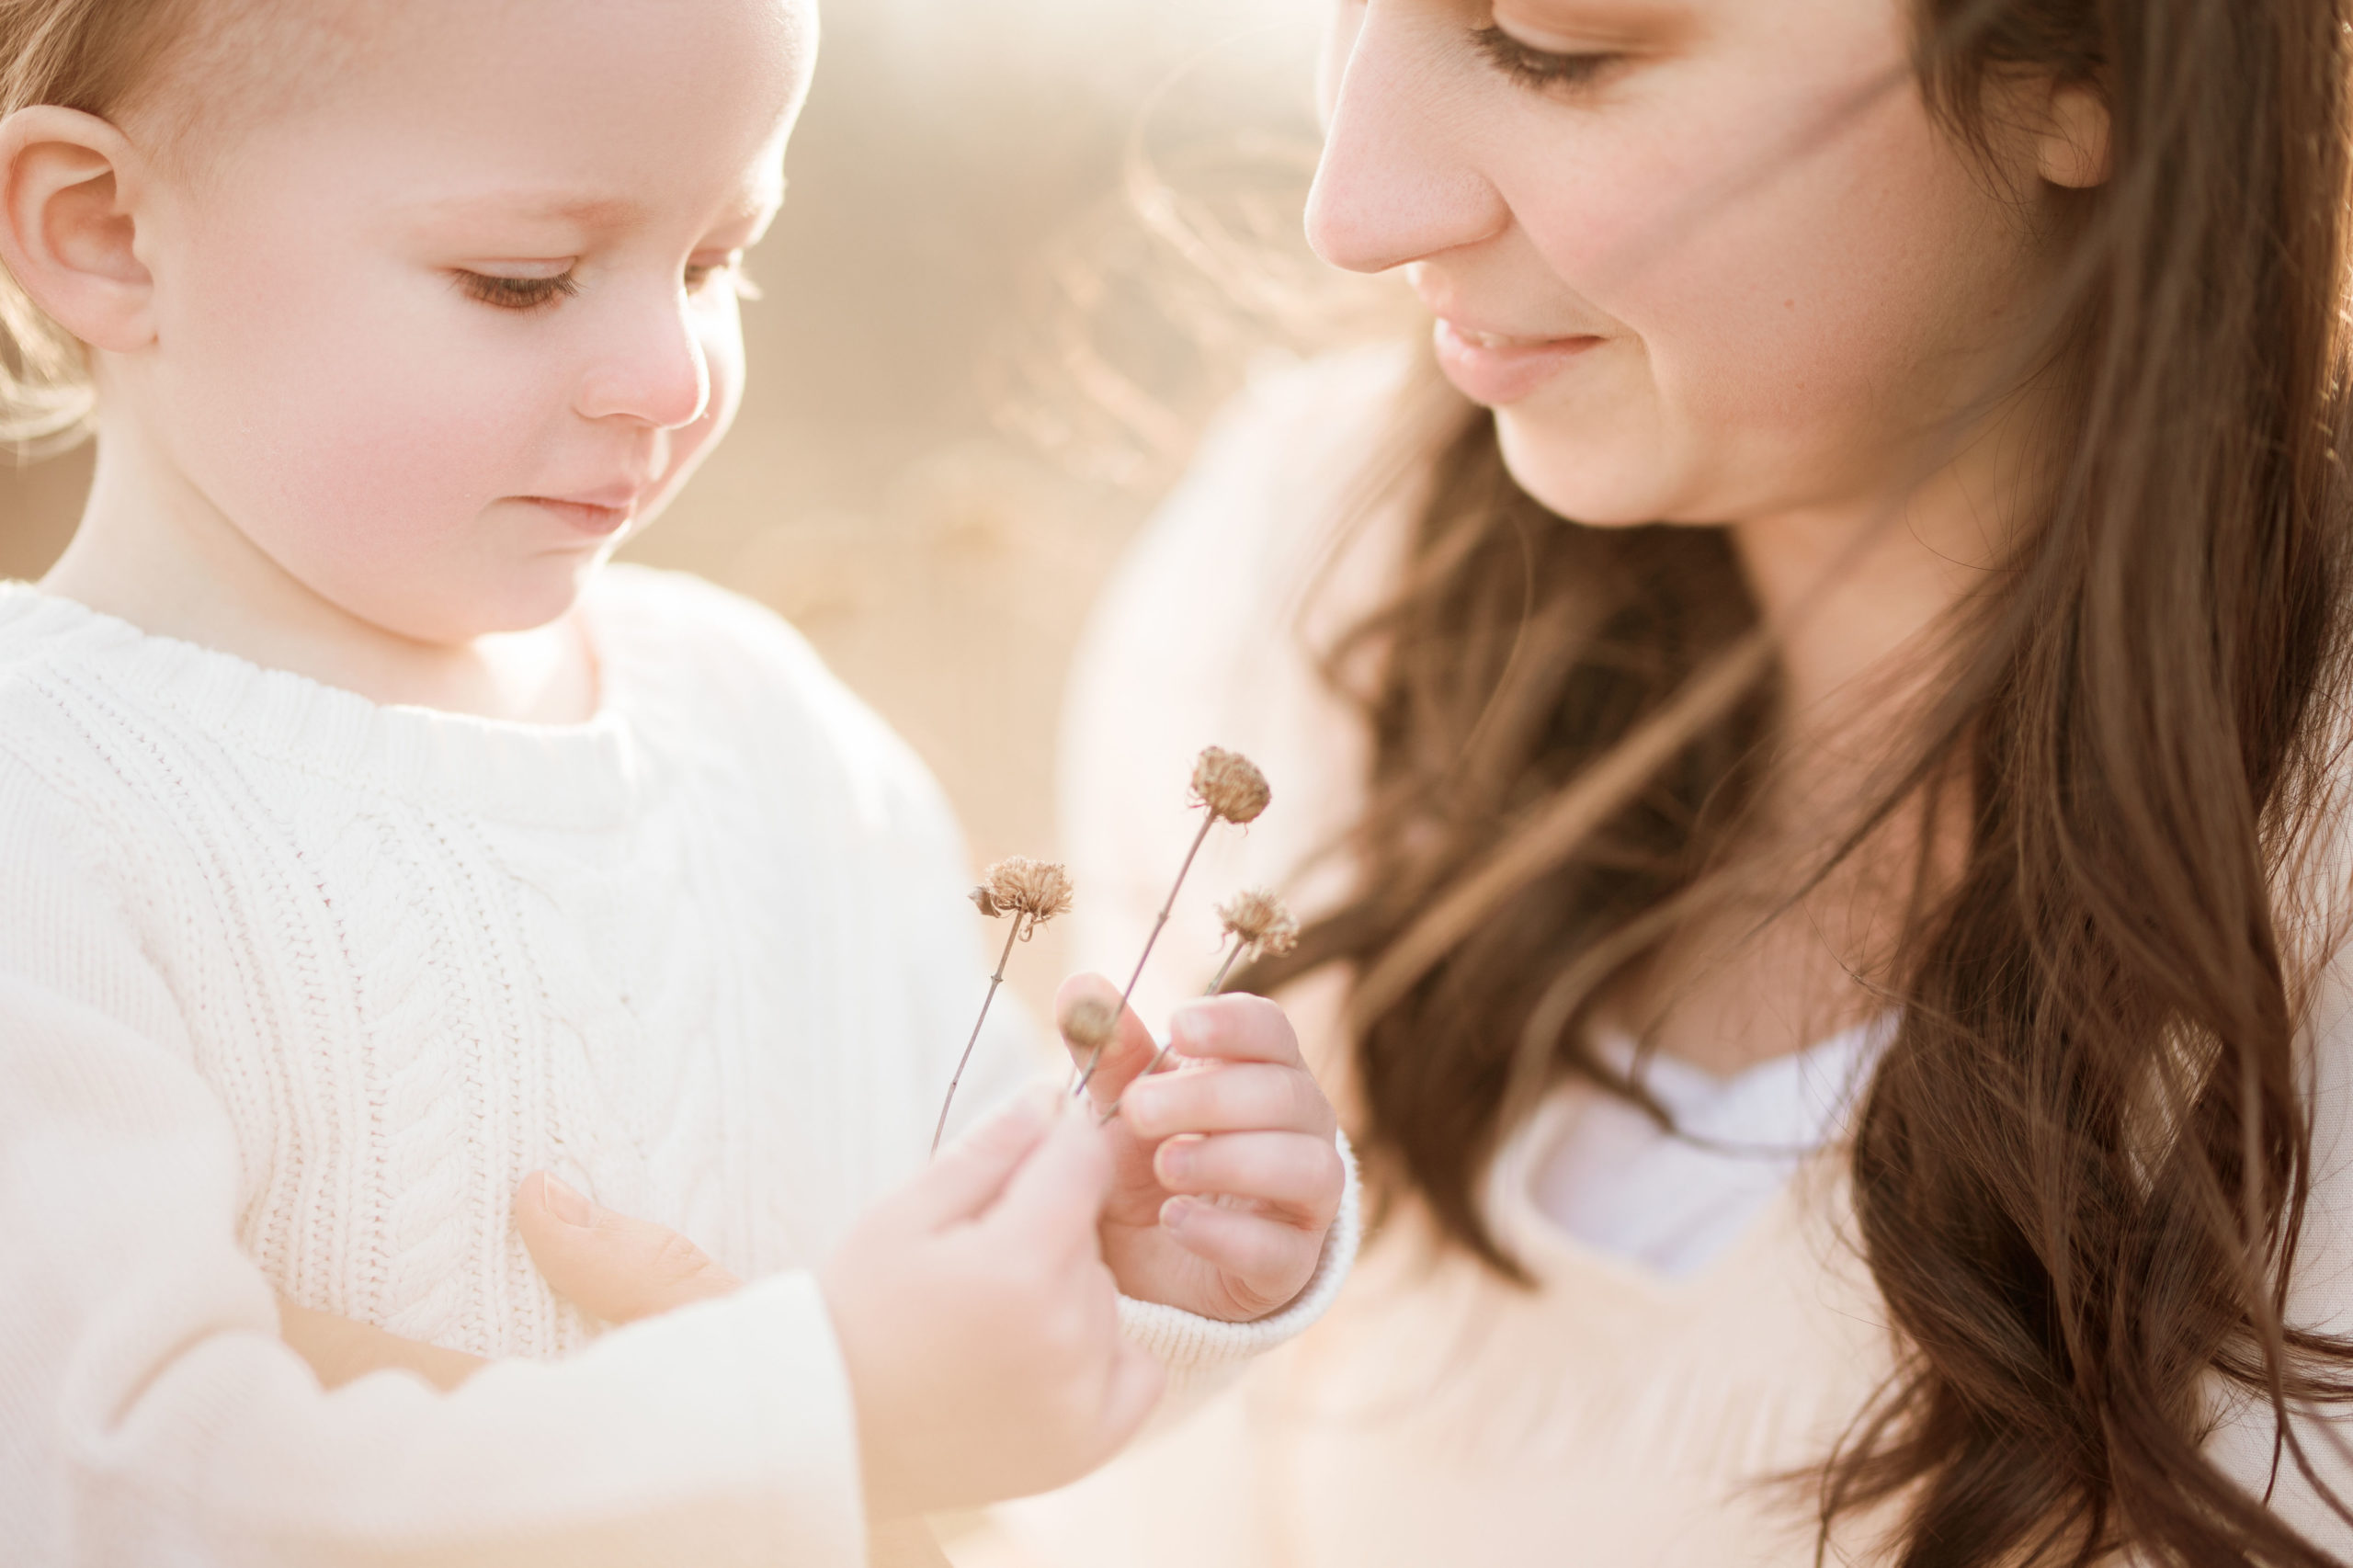 mom and young child looking at a flower